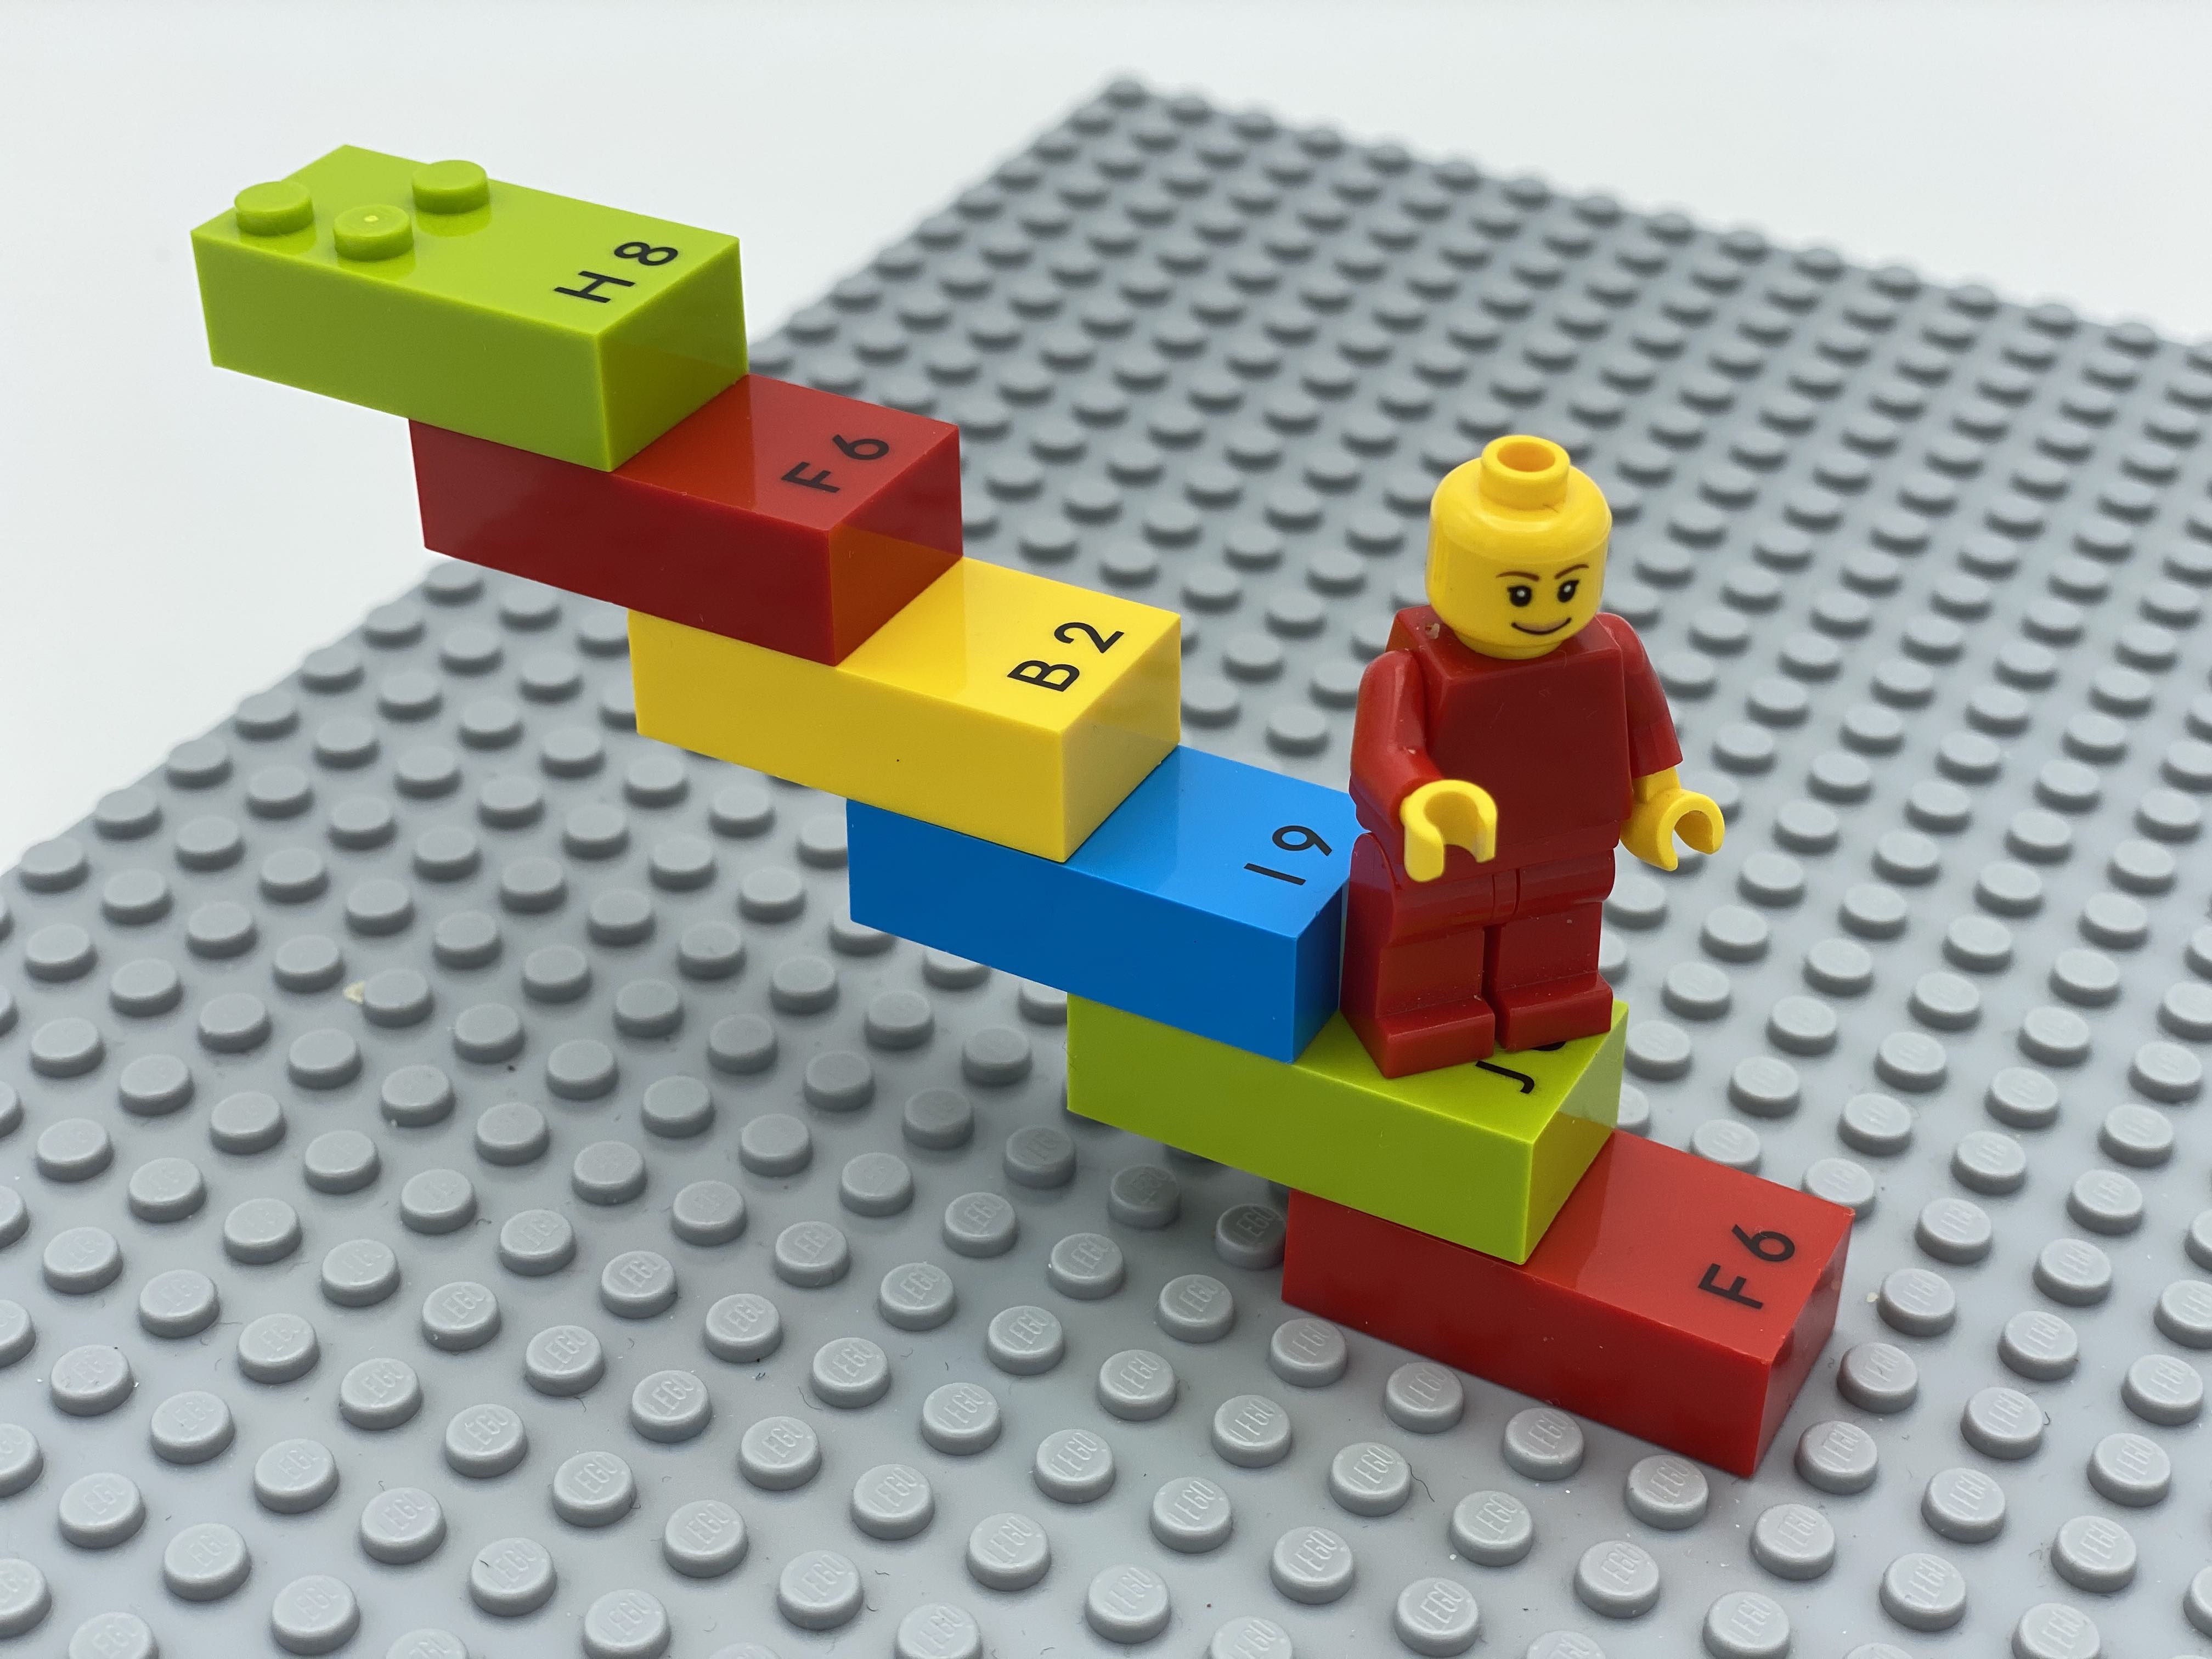 1 staircase made of bricks, with a LEGO mini figure on step 2.